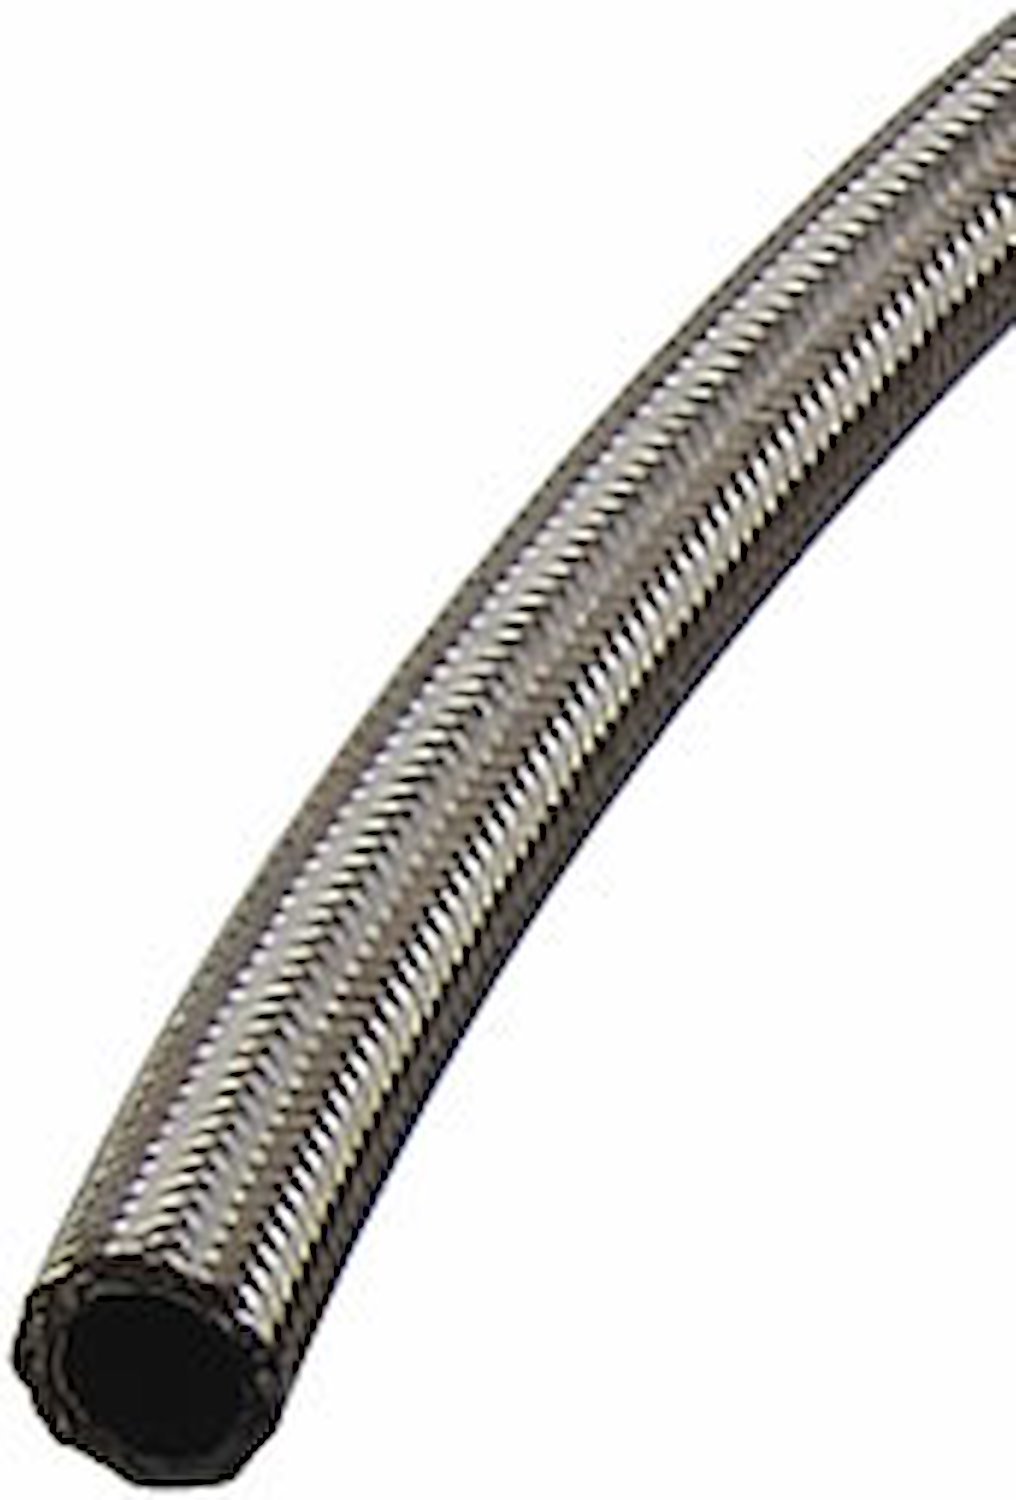 Pro-Flo 200 Series Stainless Steel Braided Hose -12 AN [20 ft.]